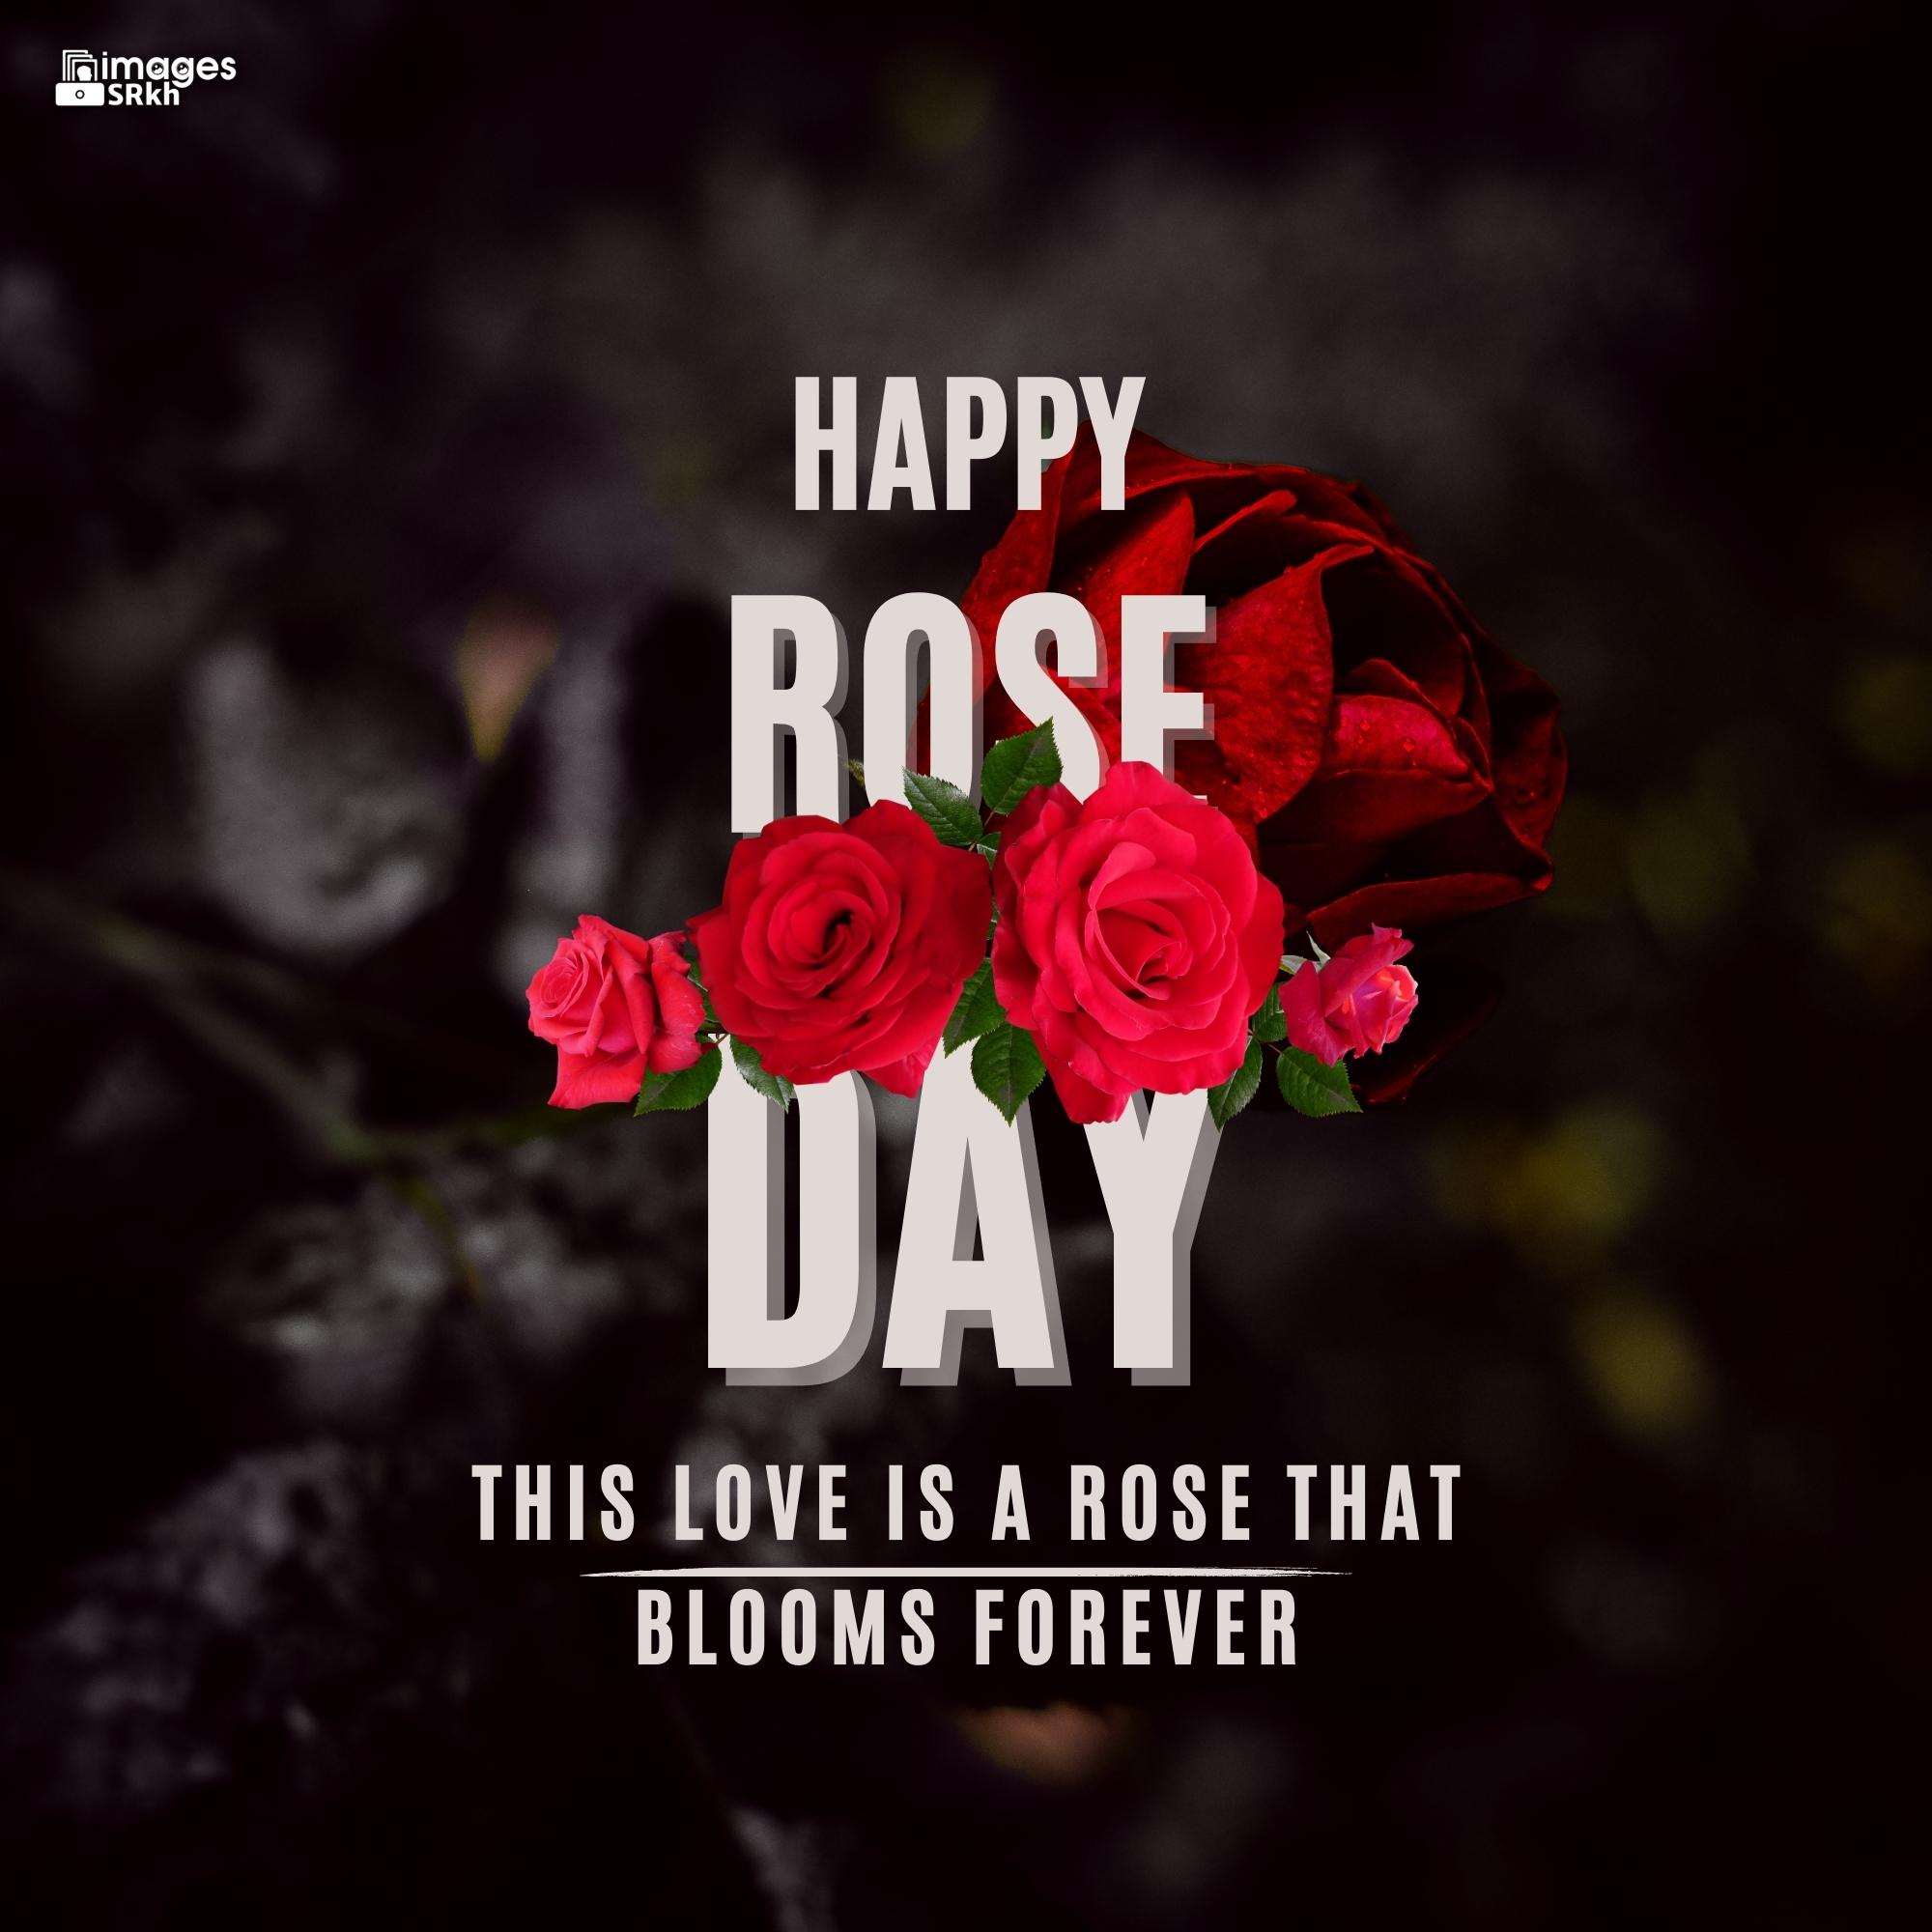 Happy Rose Day Image Hd Download (65)